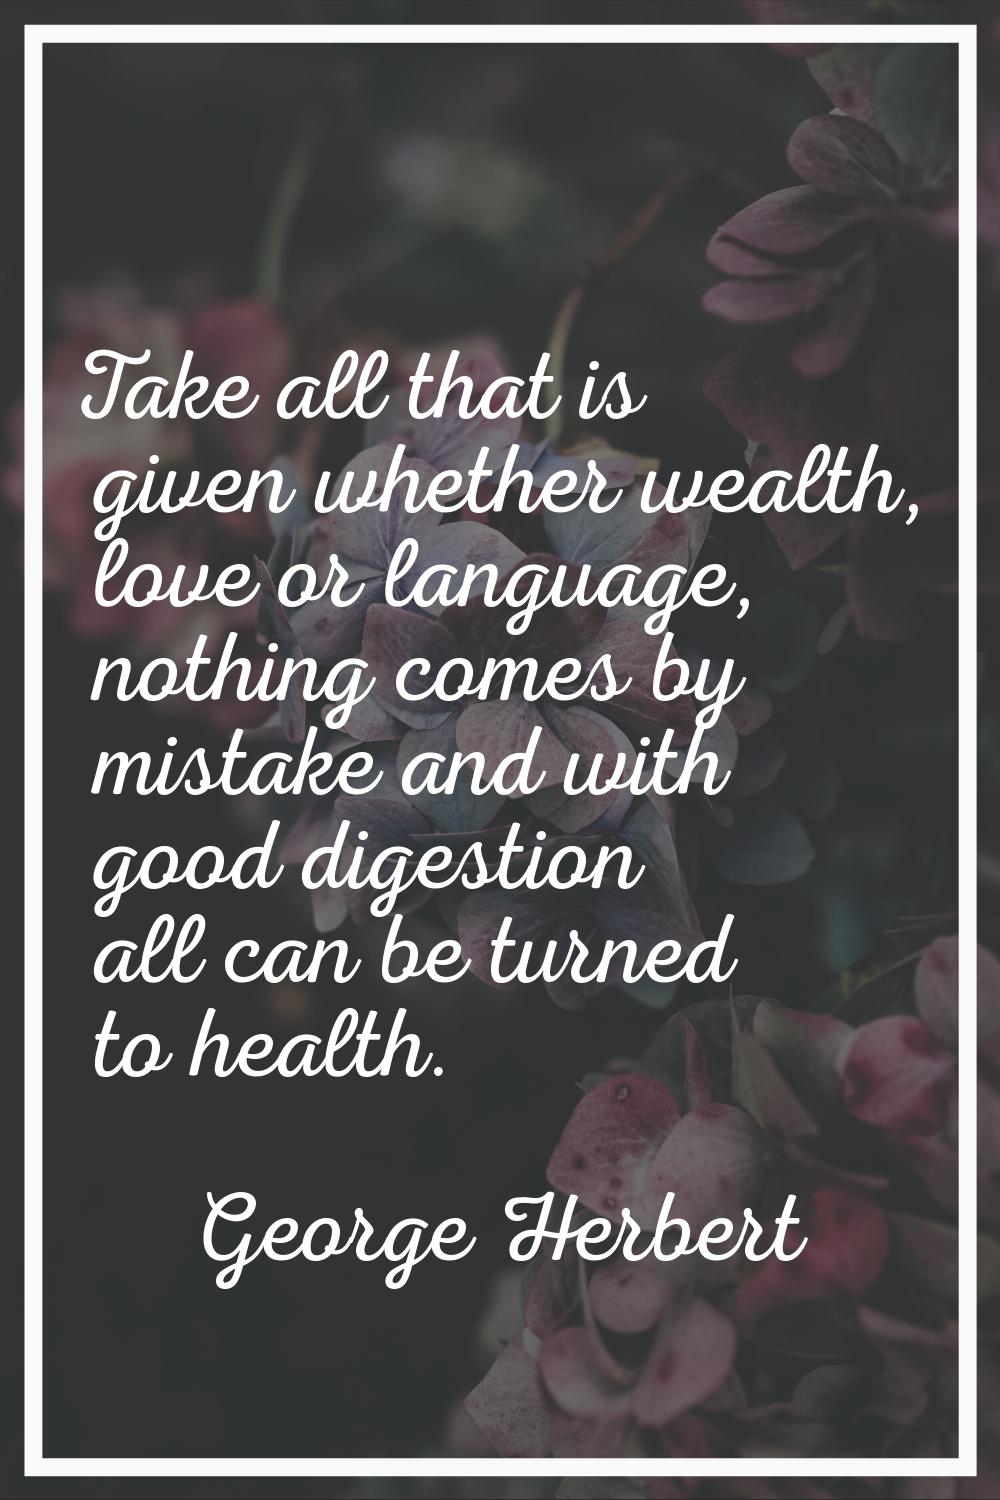 Take all that is given whether wealth, love or language, nothing comes by mistake and with good dig